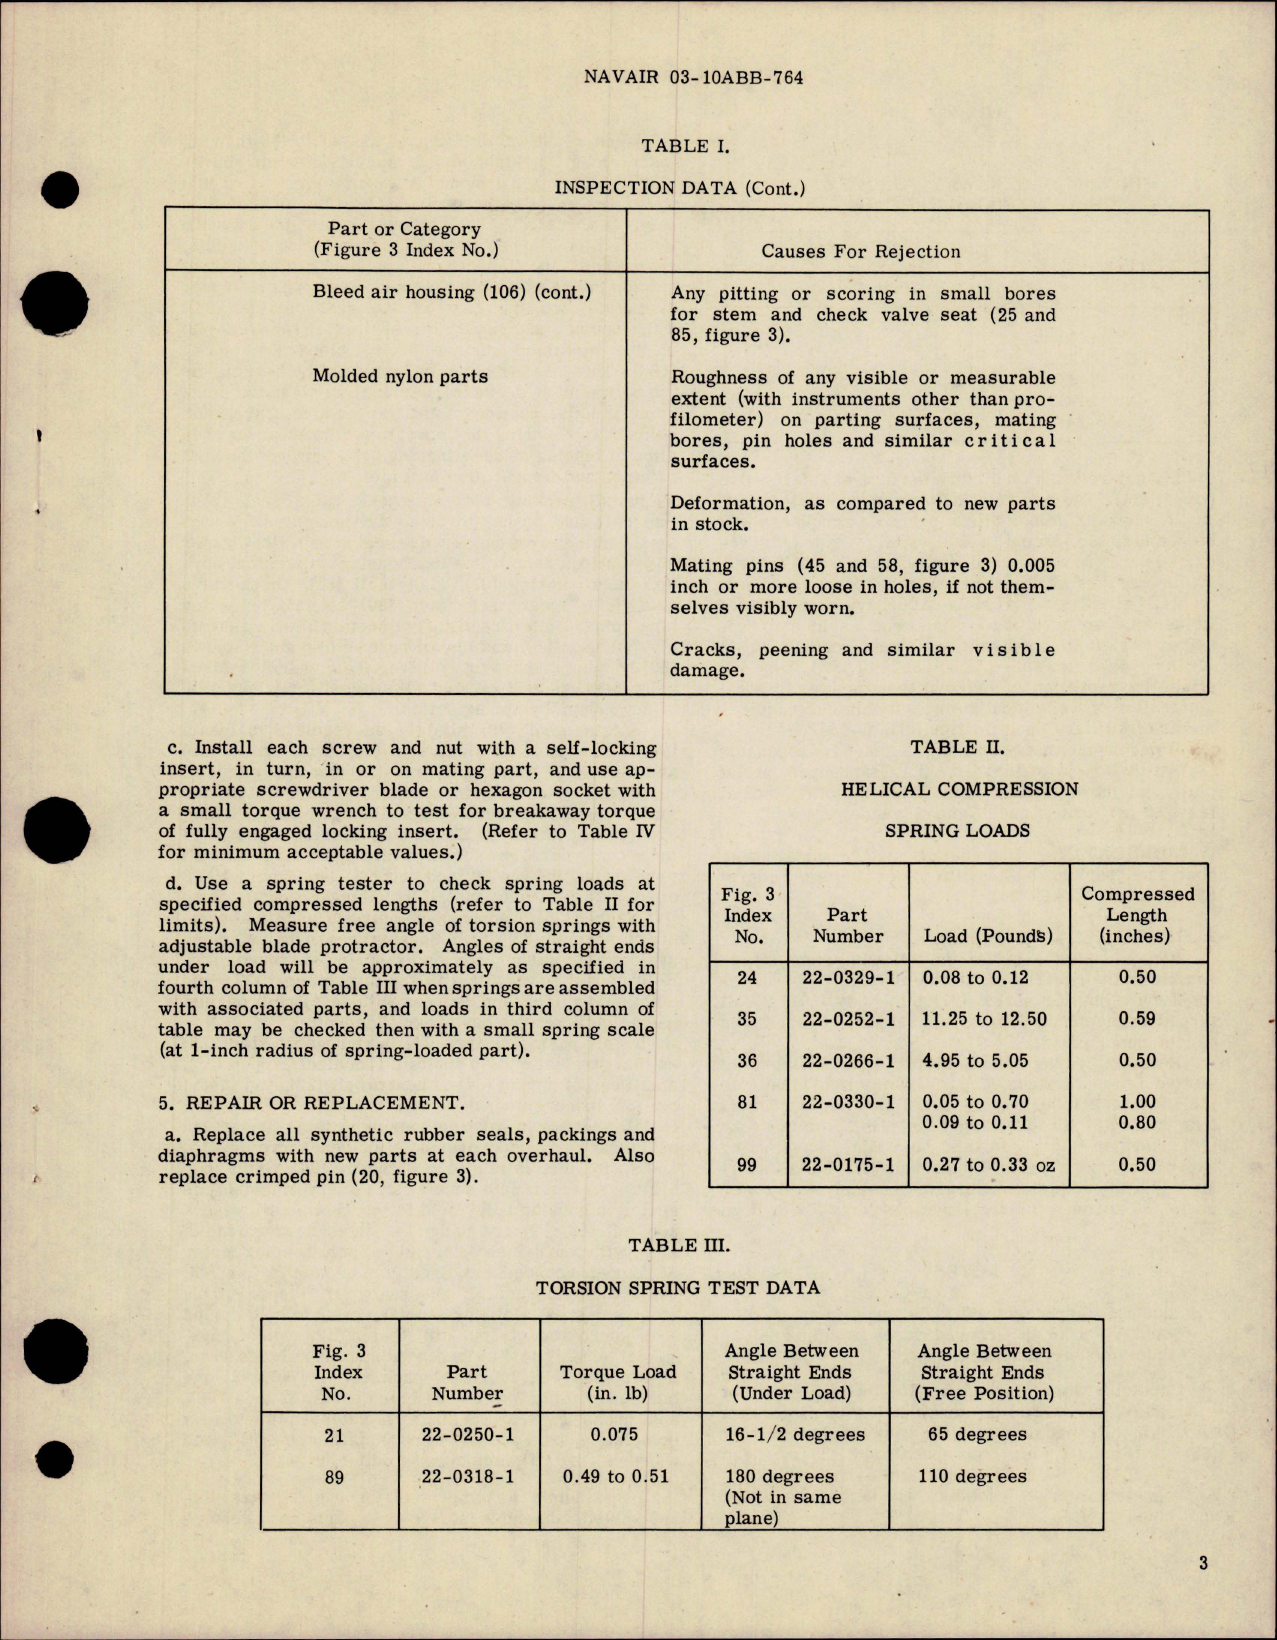 Sample page 5 from AirCorps Library document: Overhaul Instructions with Parts Breakdown for Vent Shutoff Valve - Part 22-2150-001 and 22-2150-002 